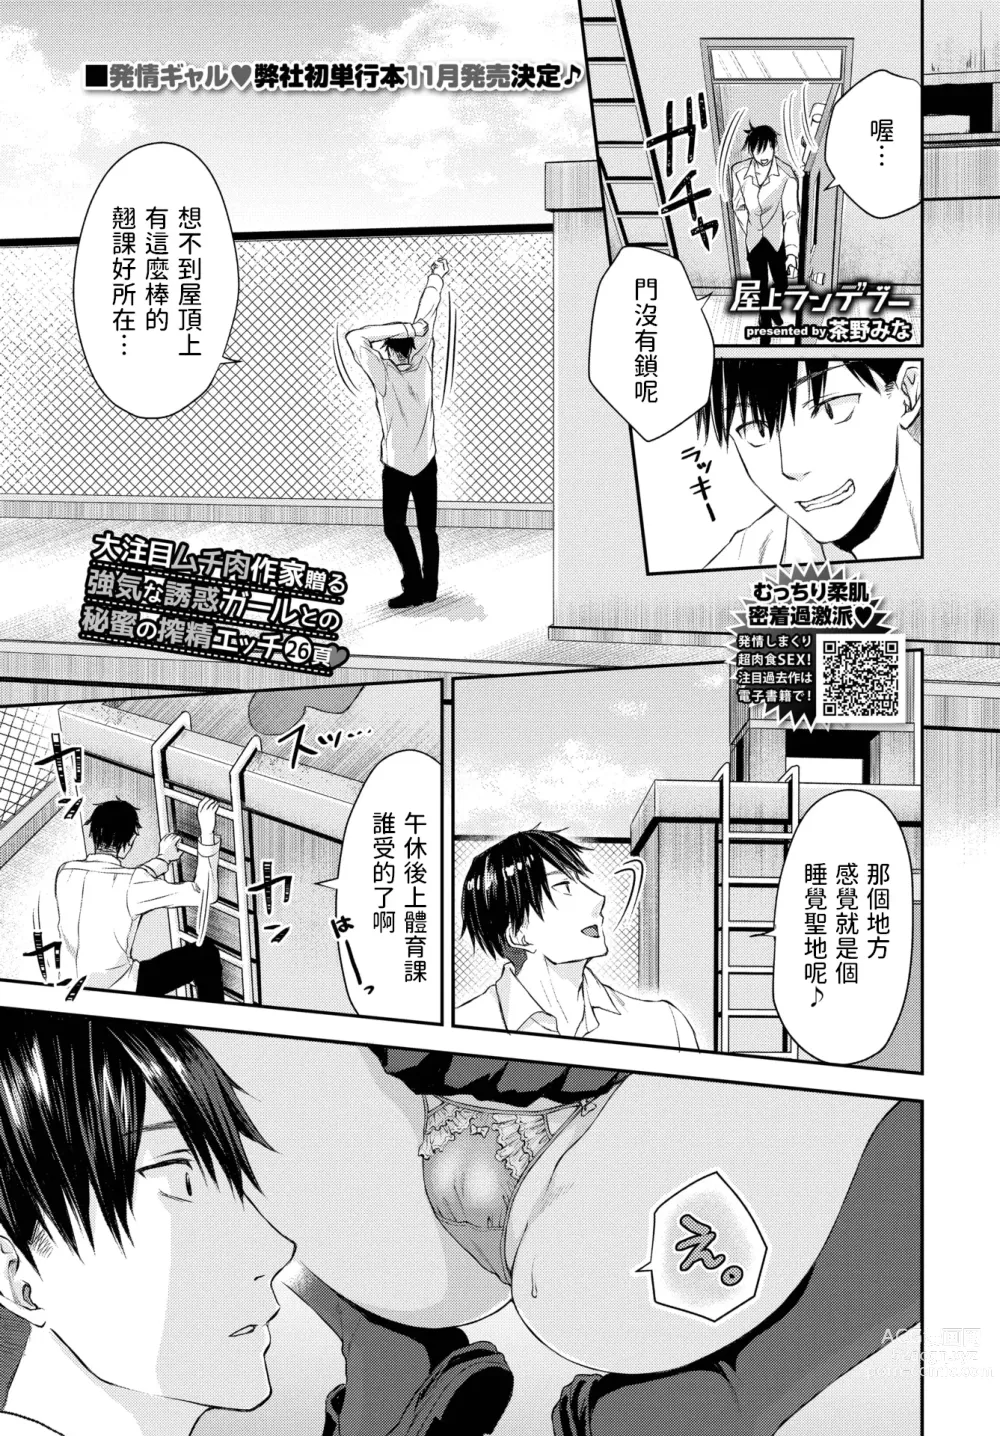 Page 1 of doujinshi 屋上ランデブー